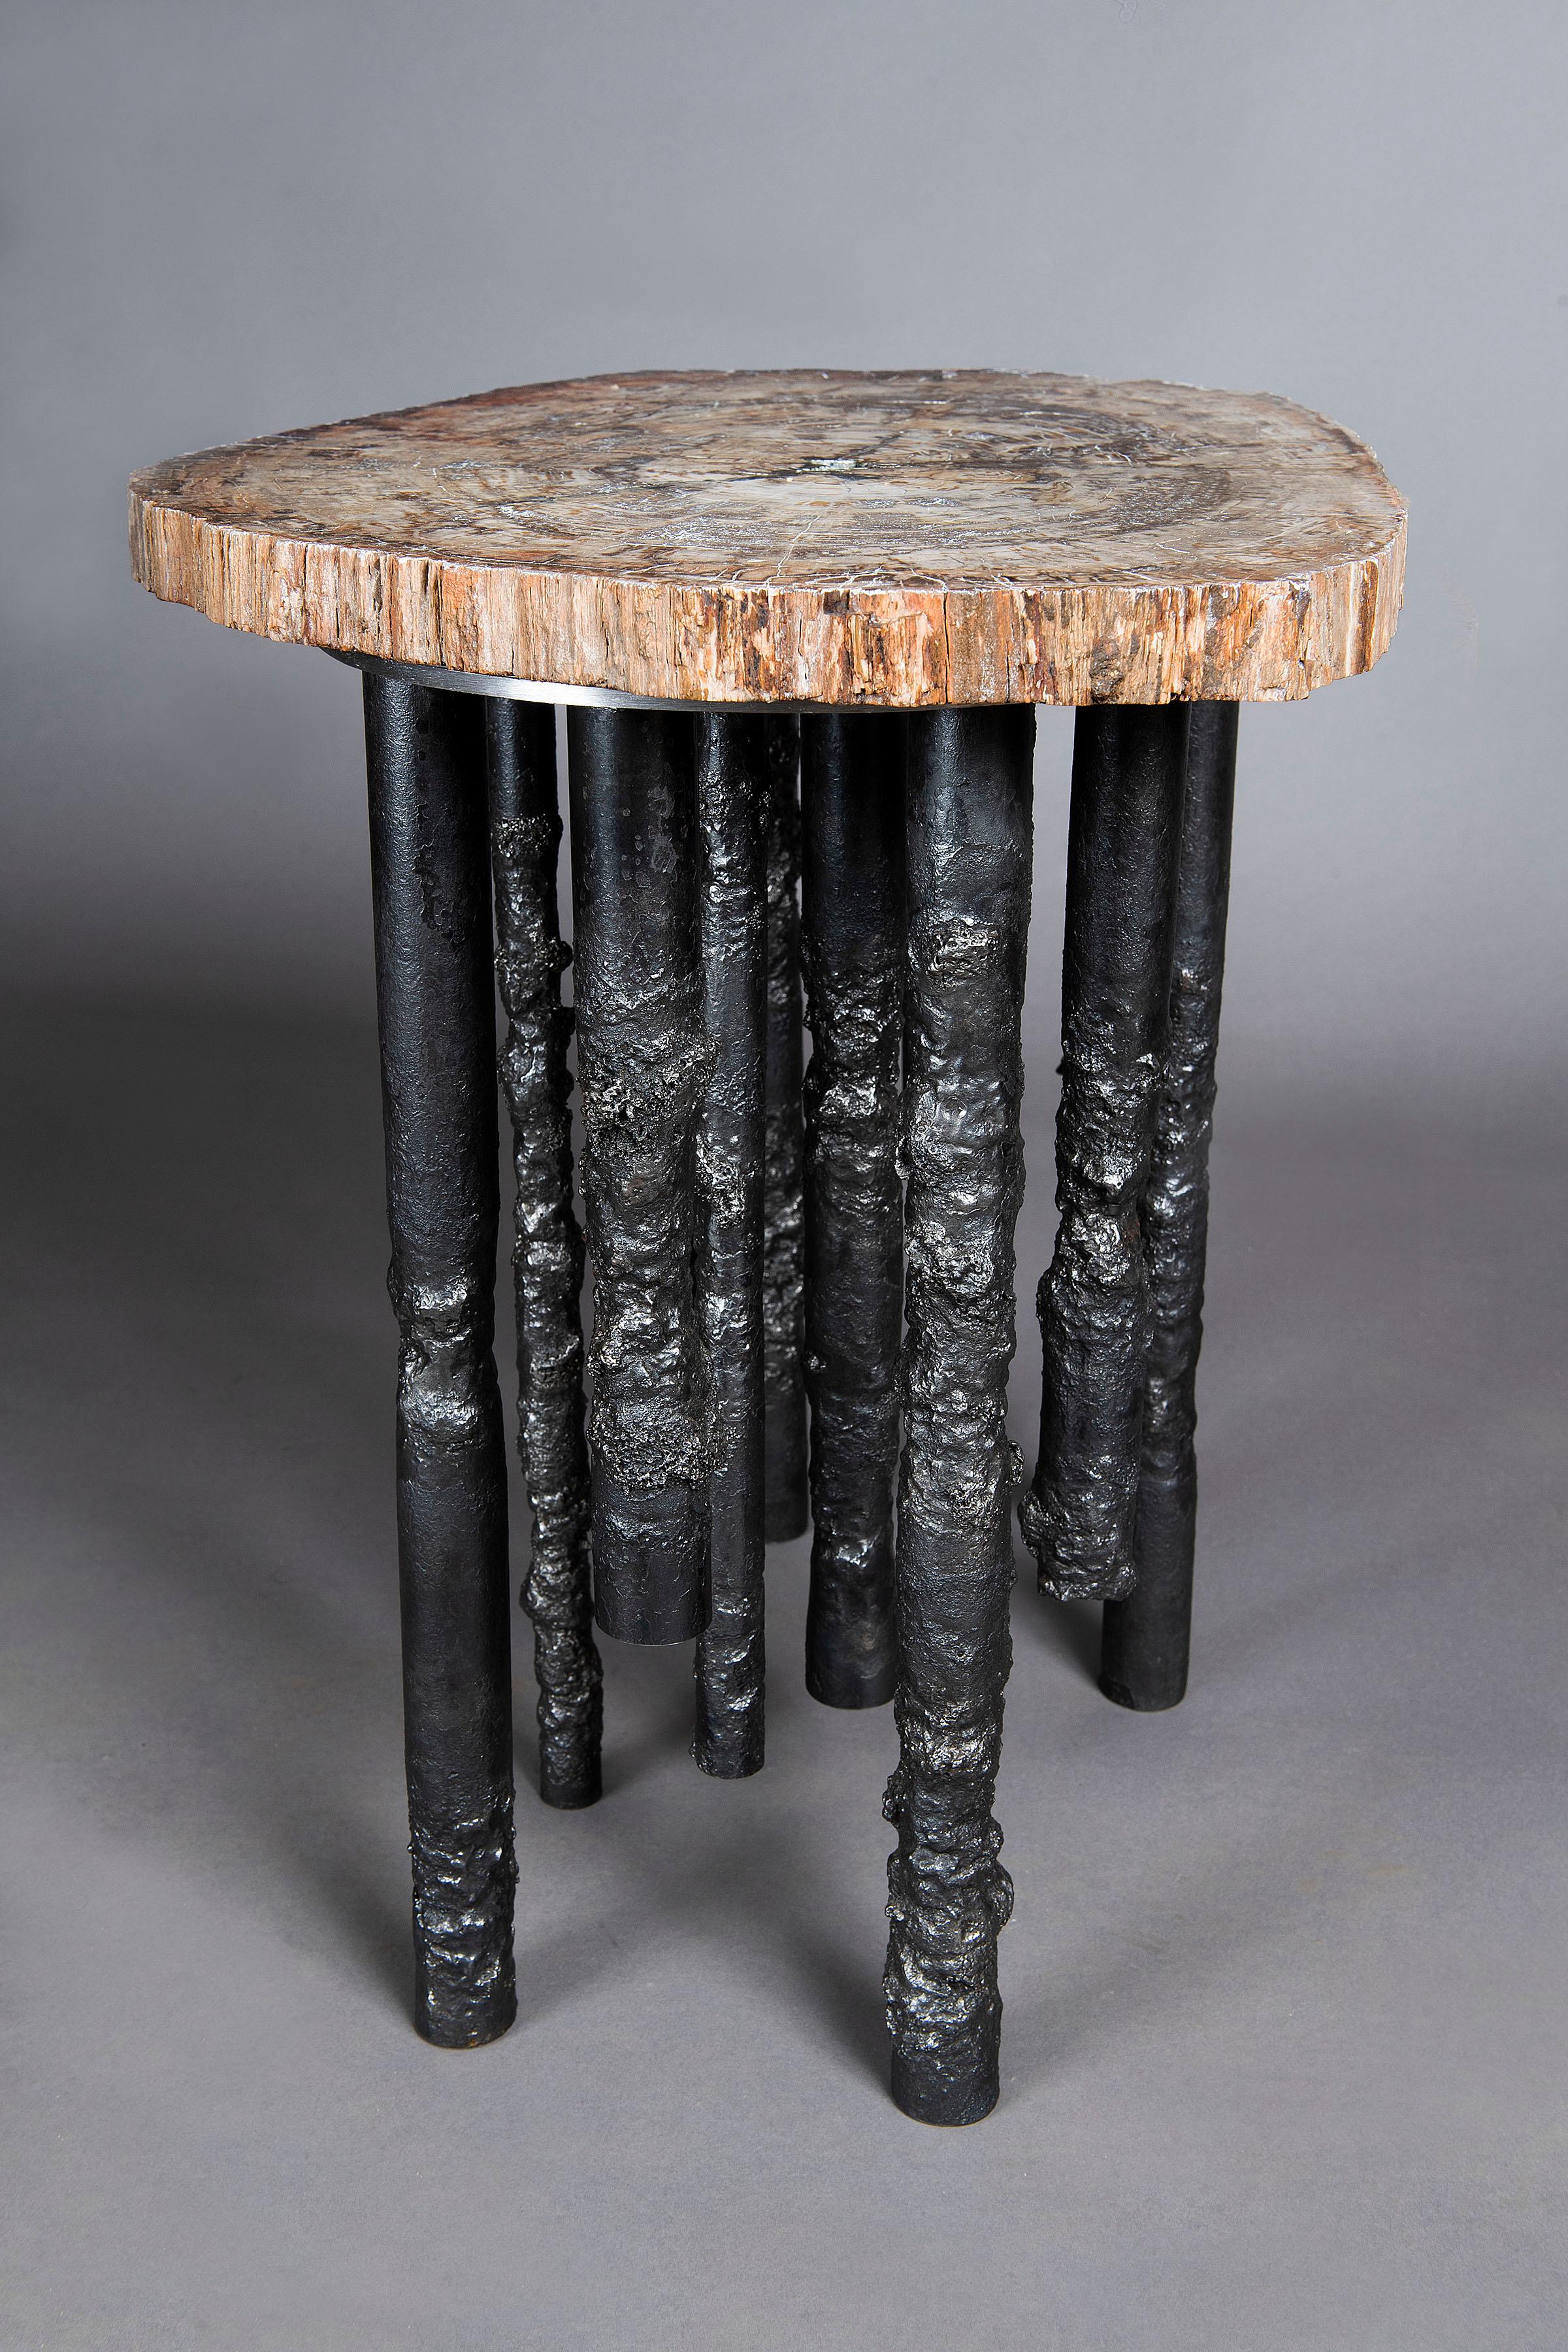 Organic Modern Hand Crafted Petrified Wood And Steel Sculptural One Of A Kind Iron Side Table For Sale